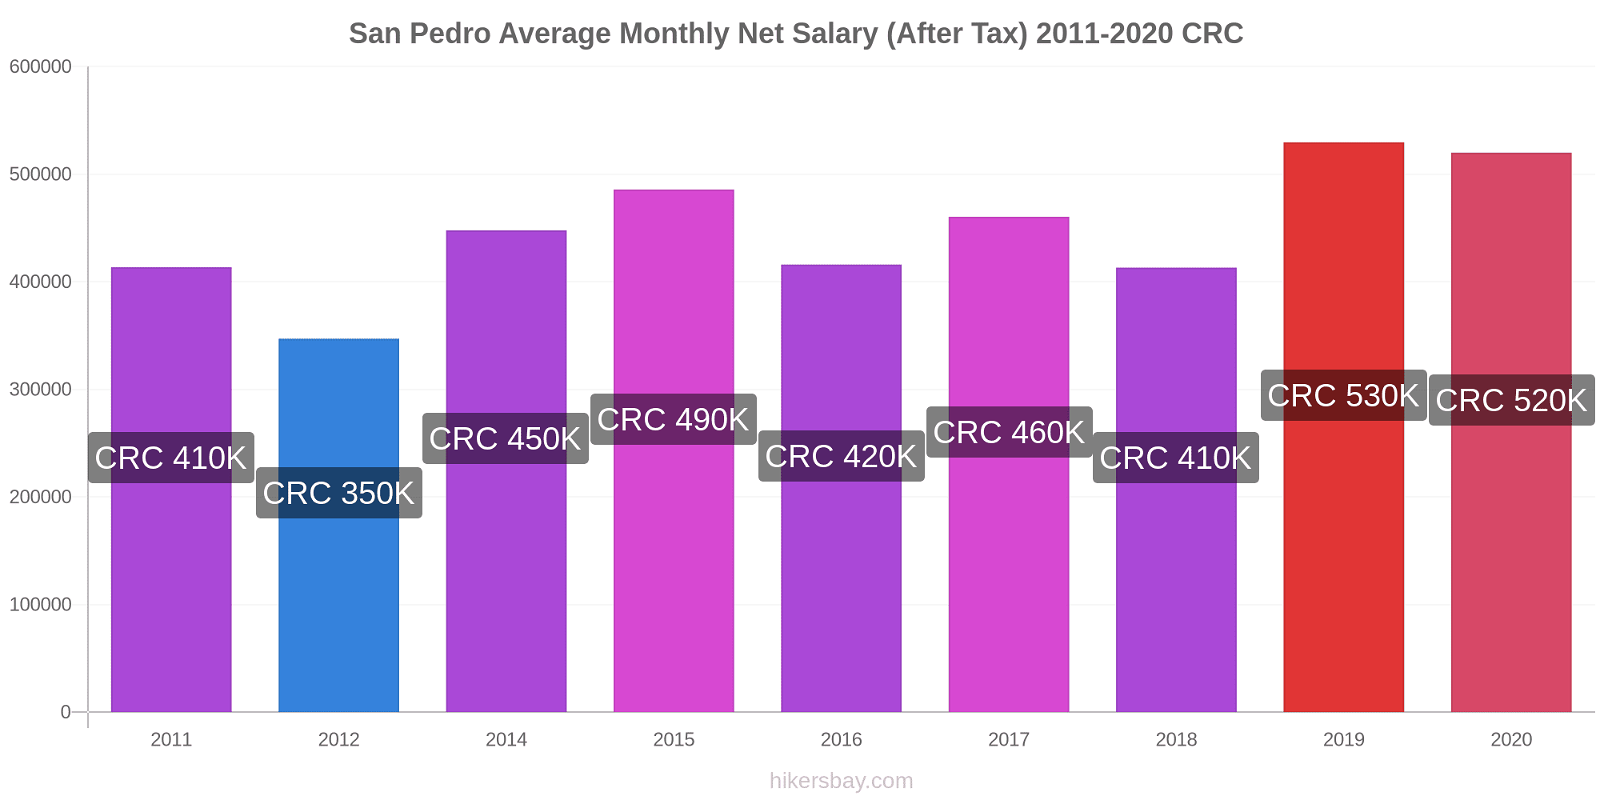 San Pedro price changes Average Monthly Net Salary (After Tax) hikersbay.com